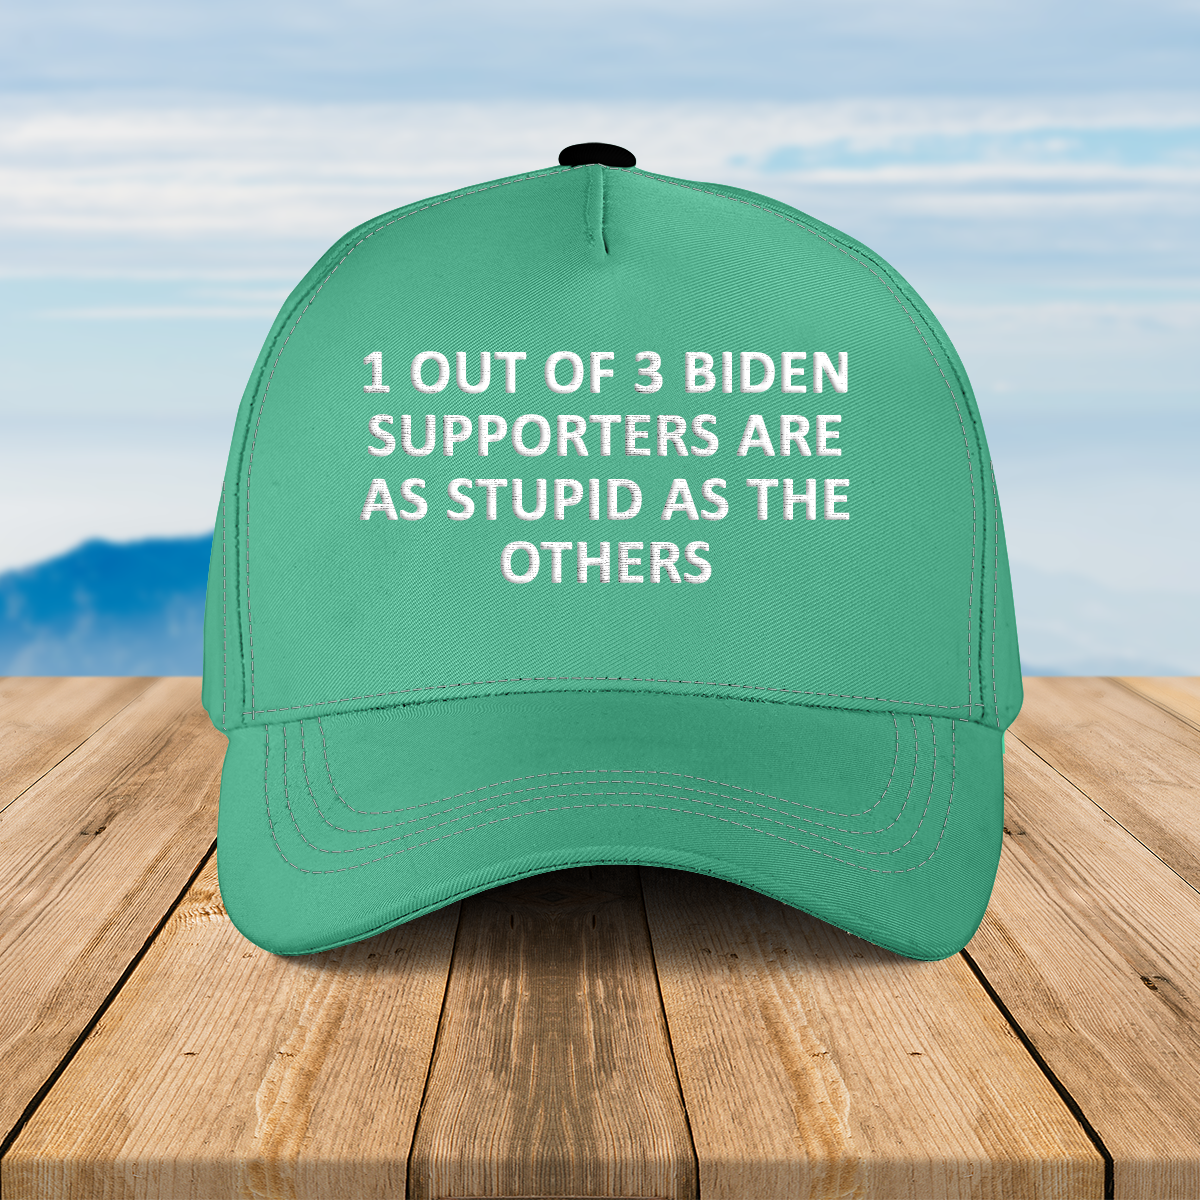 10 1 Out Of 3 Biden Supporters Are As Stupid As The Others Cap 2